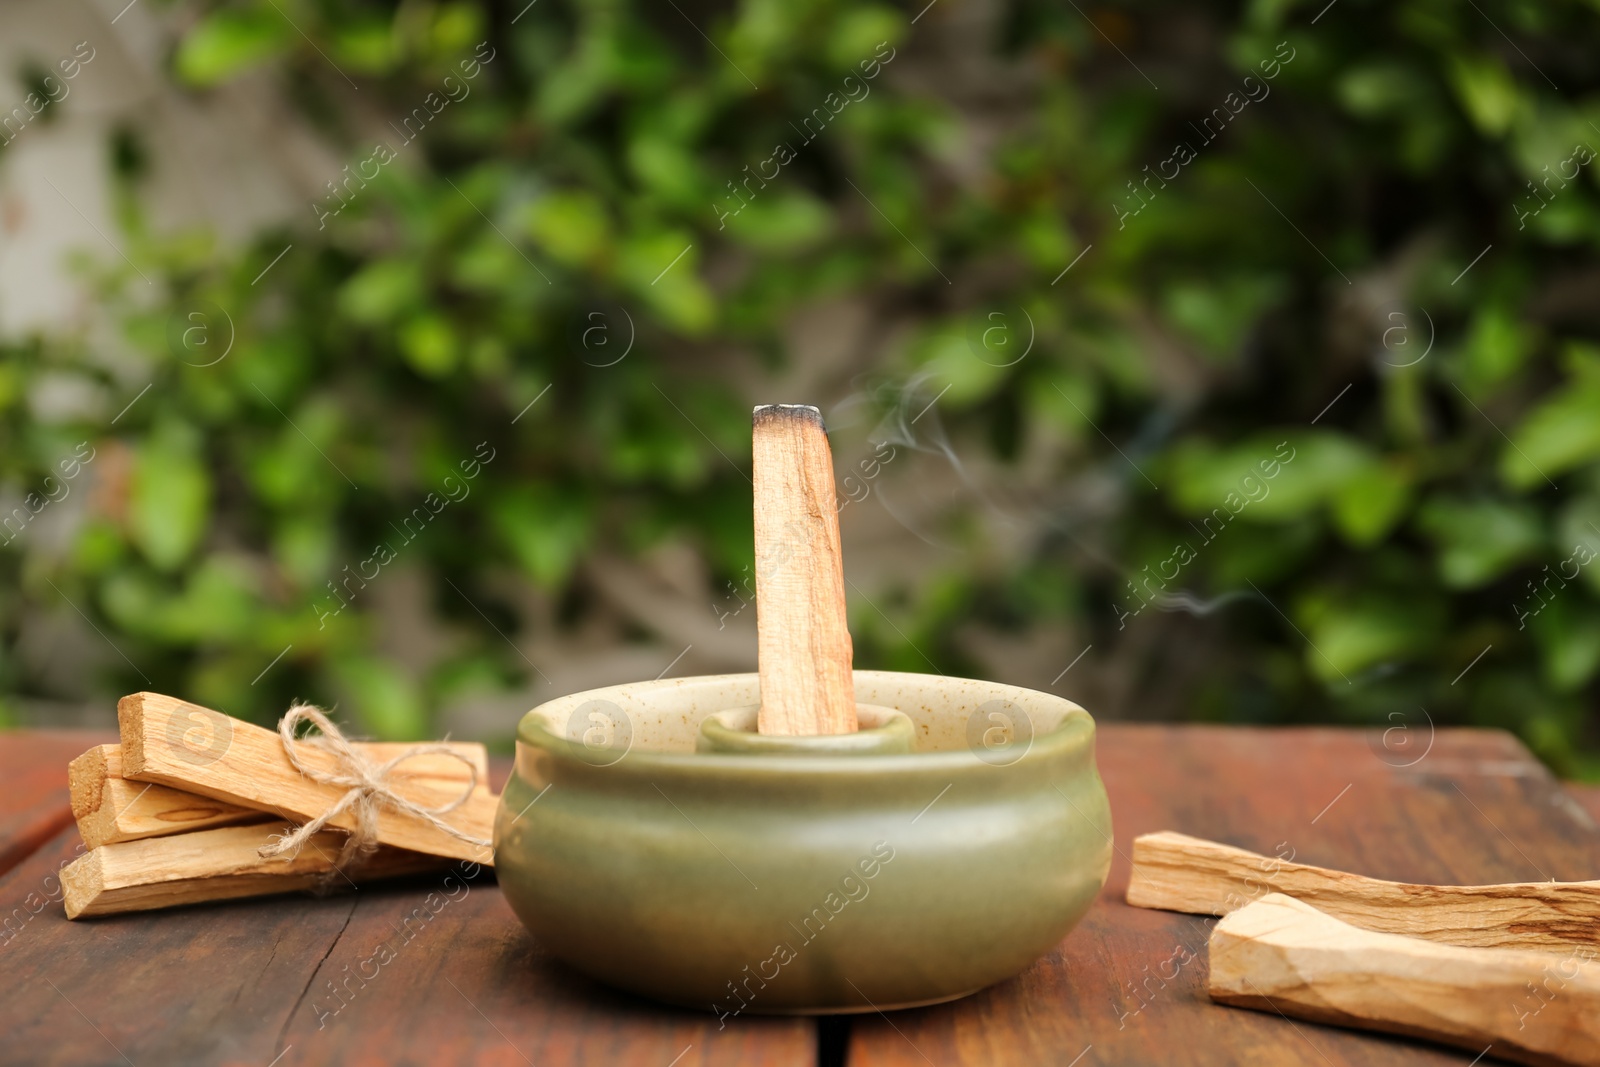 Photo of Palo Santo stick smoldering in holder on wooden table outdoors